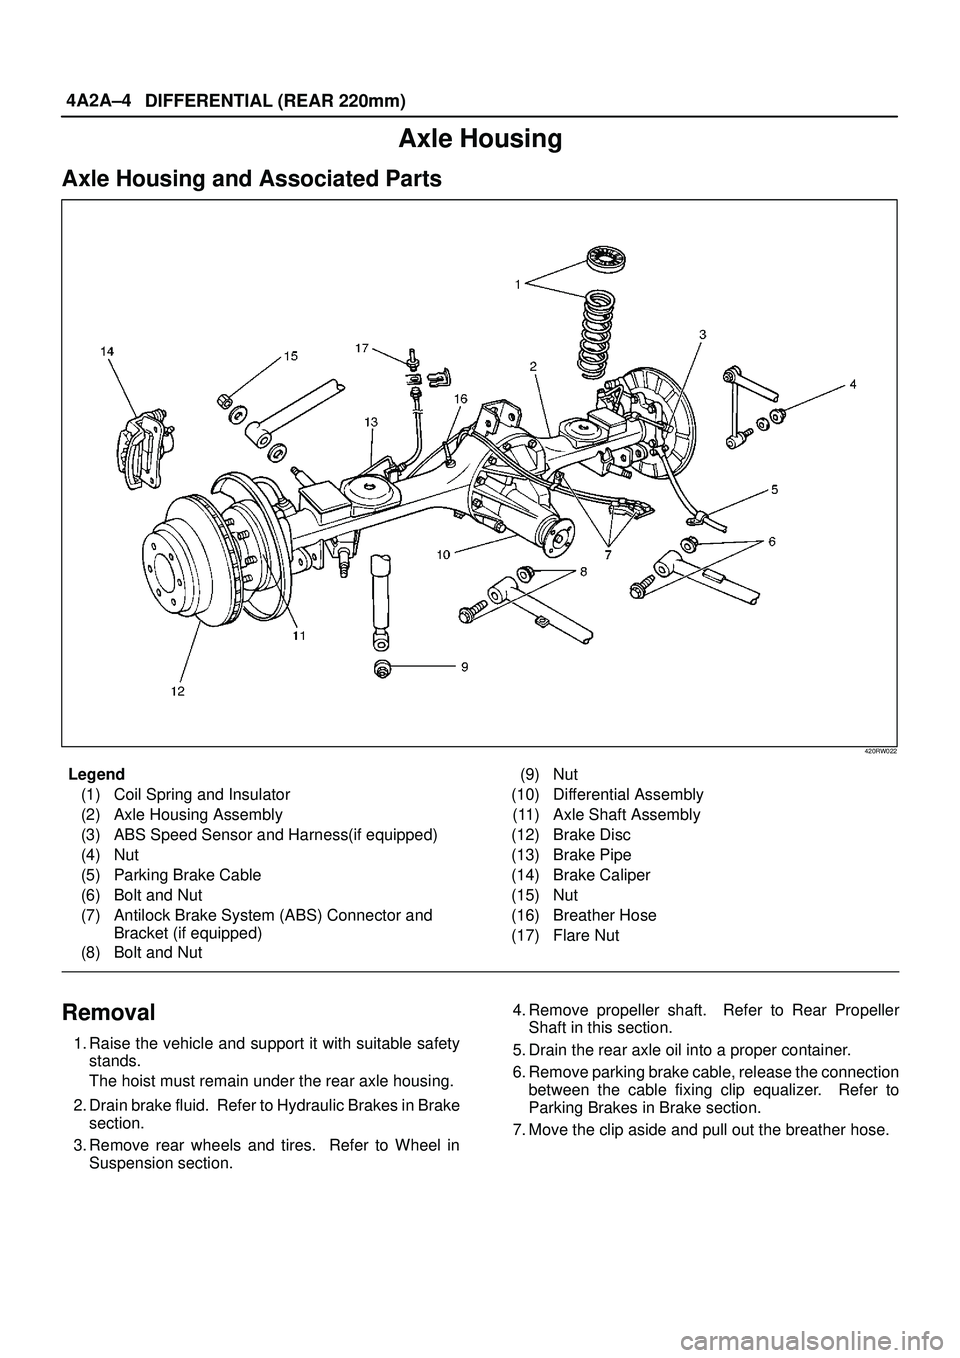 ISUZU TROOPER 1998  Service Repair Manual 4A2A±4
DIFFERENTIAL (REAR 220mm)
Axle Housing
Axle Housing and Associated Parts
420RW022
Legend
(1) Coil Spring and Insulator
(2) Axle Housing Assembly
(3) ABS Speed Sensor and Harness(if equipped)
(